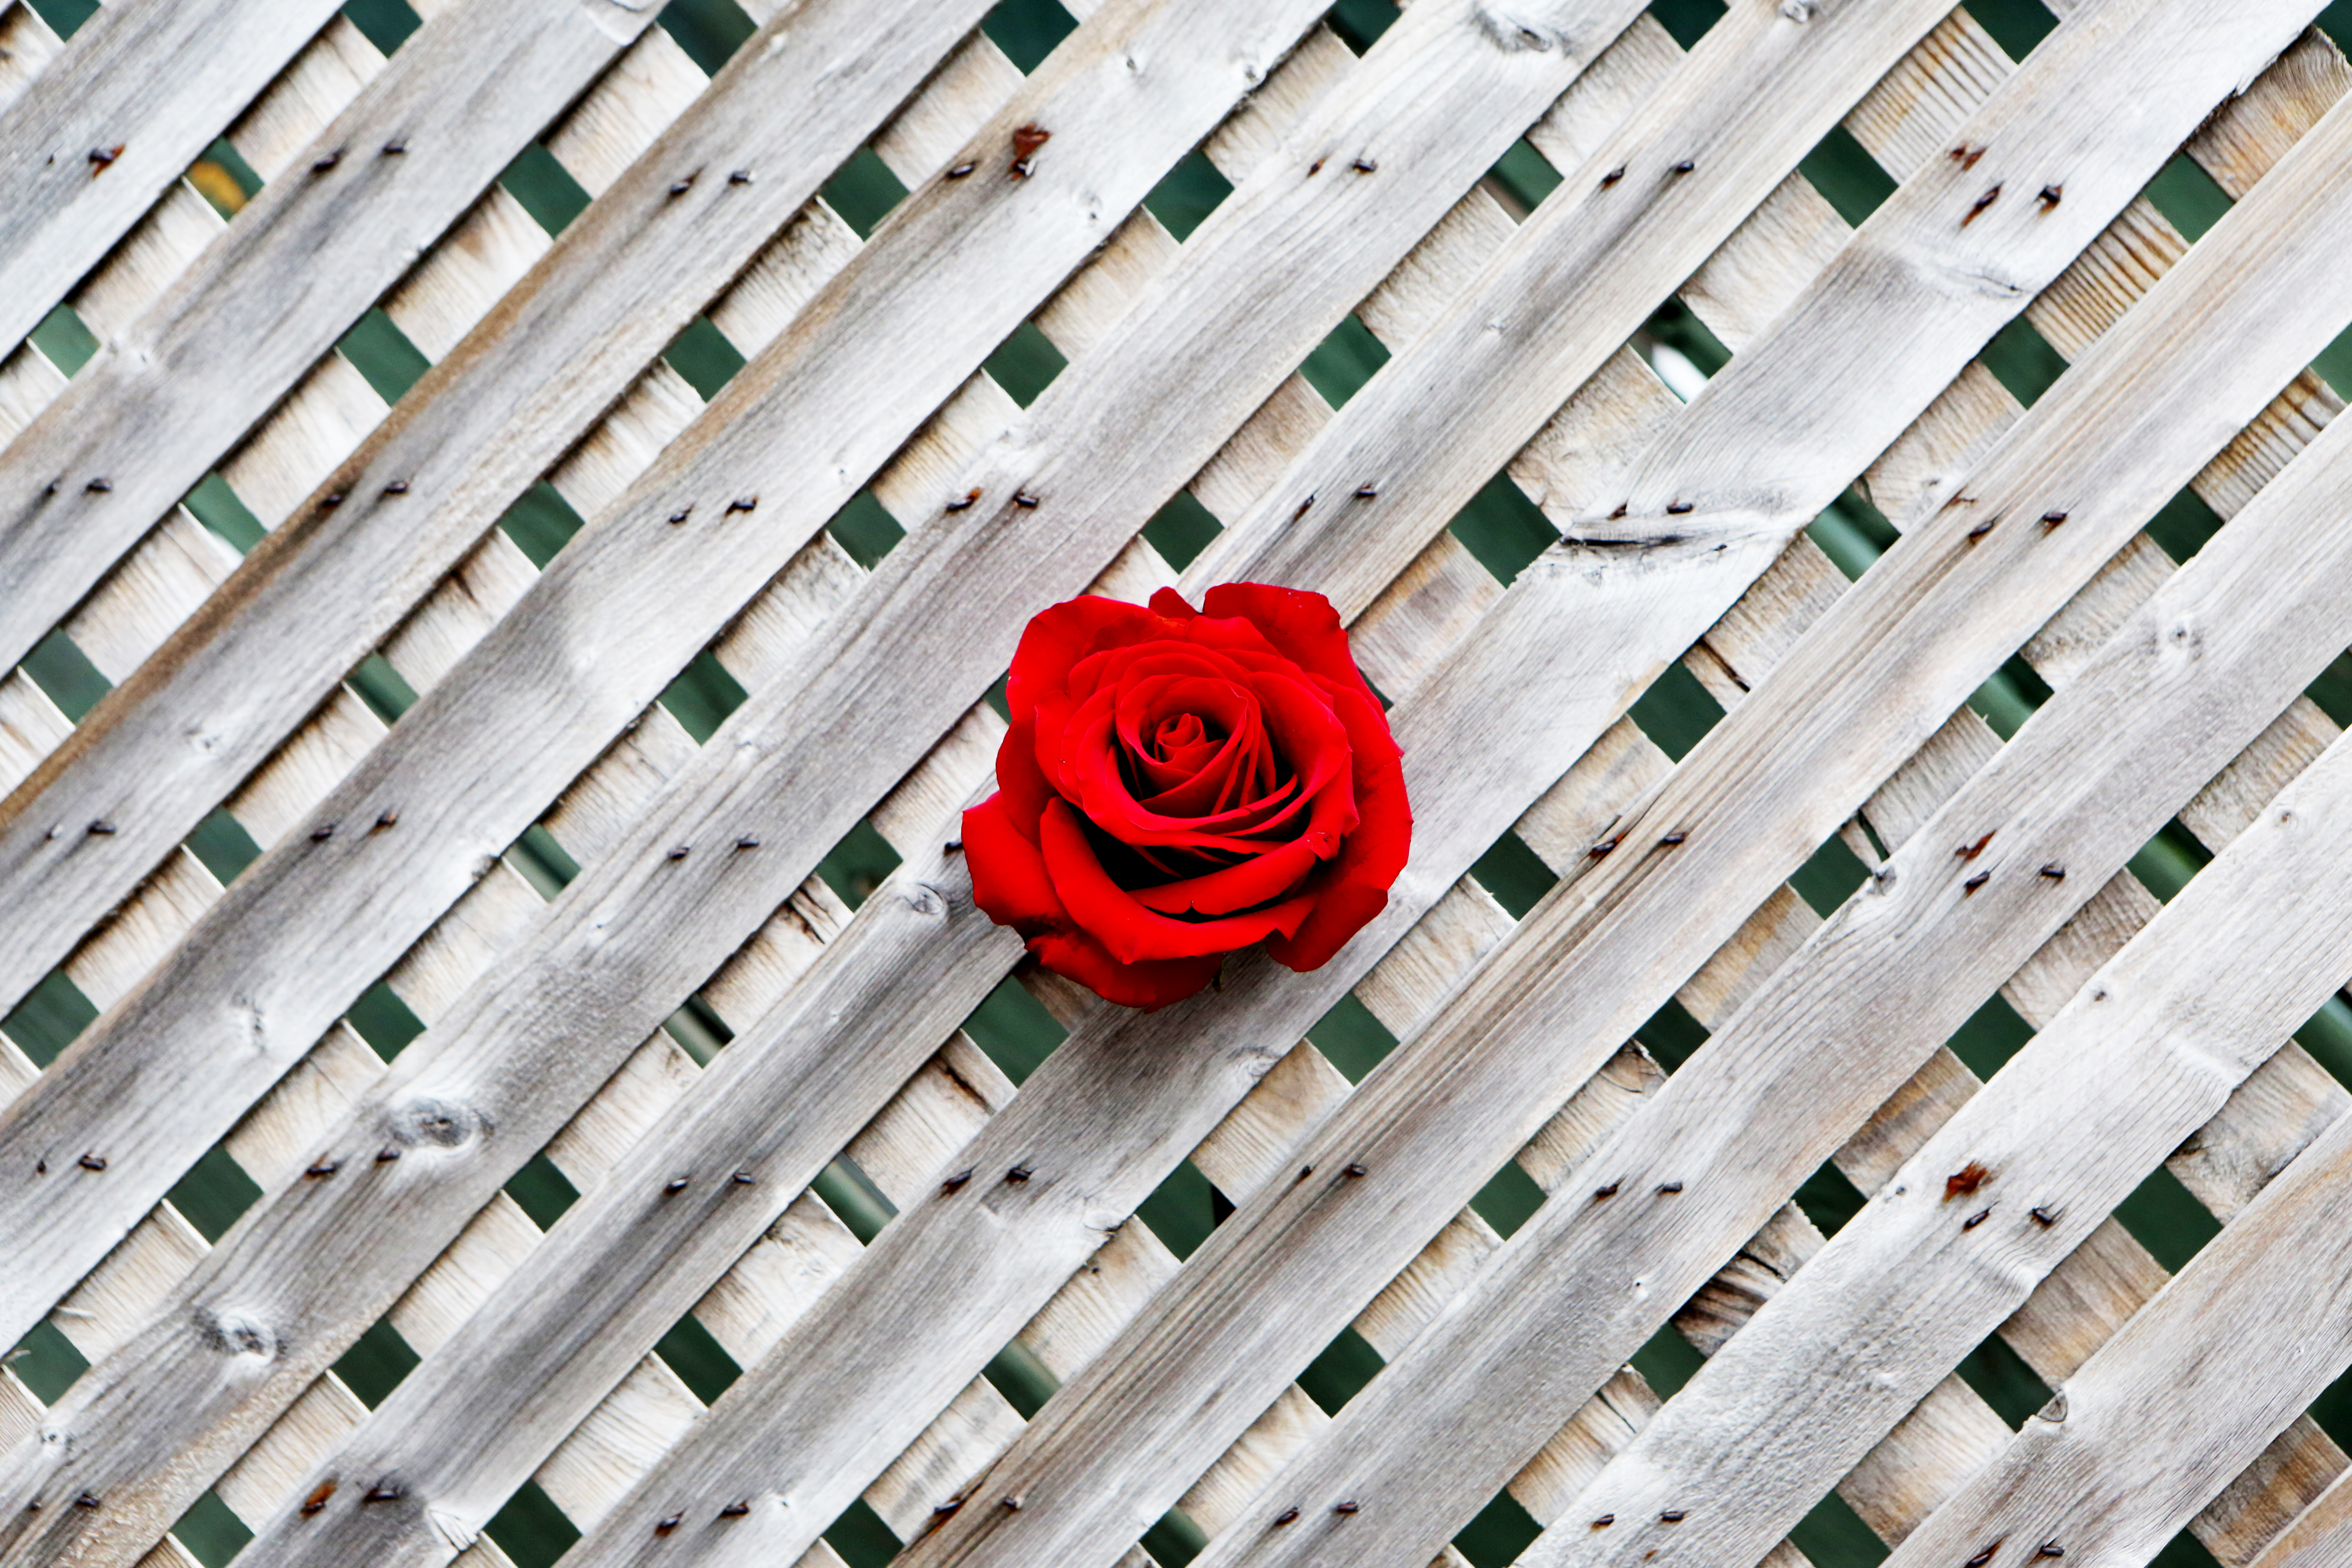 New Lock Screen Wallpapers rose, red, wood, wooden, rose flower, minimalism, wall, fence